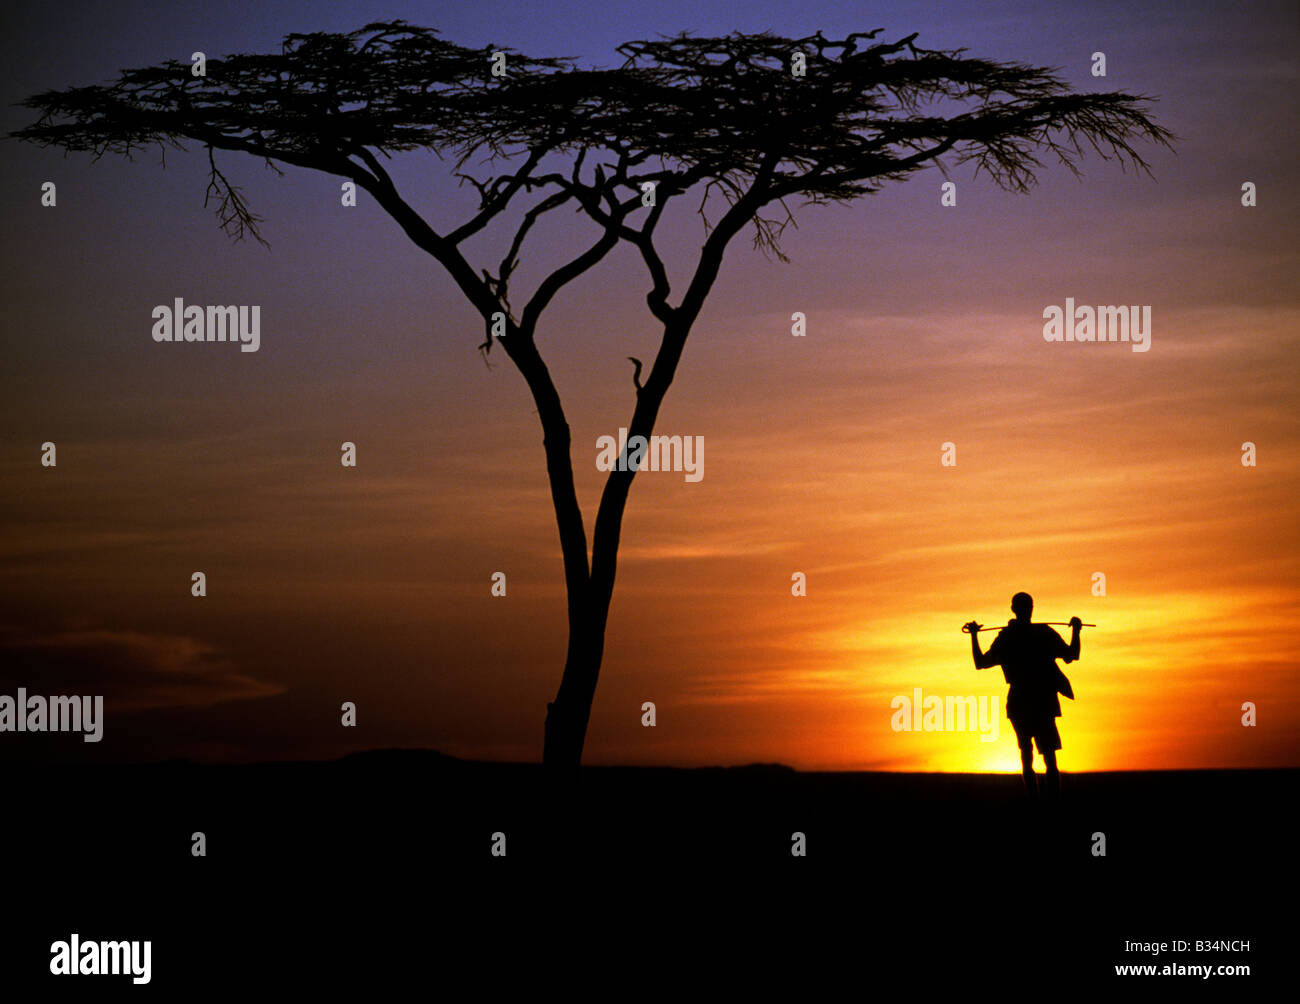 Kenya, Chalbi Desert, Kalacha. A Gabbra herdsman presents a lonely figure standing under a flat-topped acacia tree on the edge of the Chalbi Desert at sunset. The Gabbra are a Cushitic tribe of nomadic pastoralists living with their herds of camels and goats around the fringe of the Chalbi Desert. Stock Photo